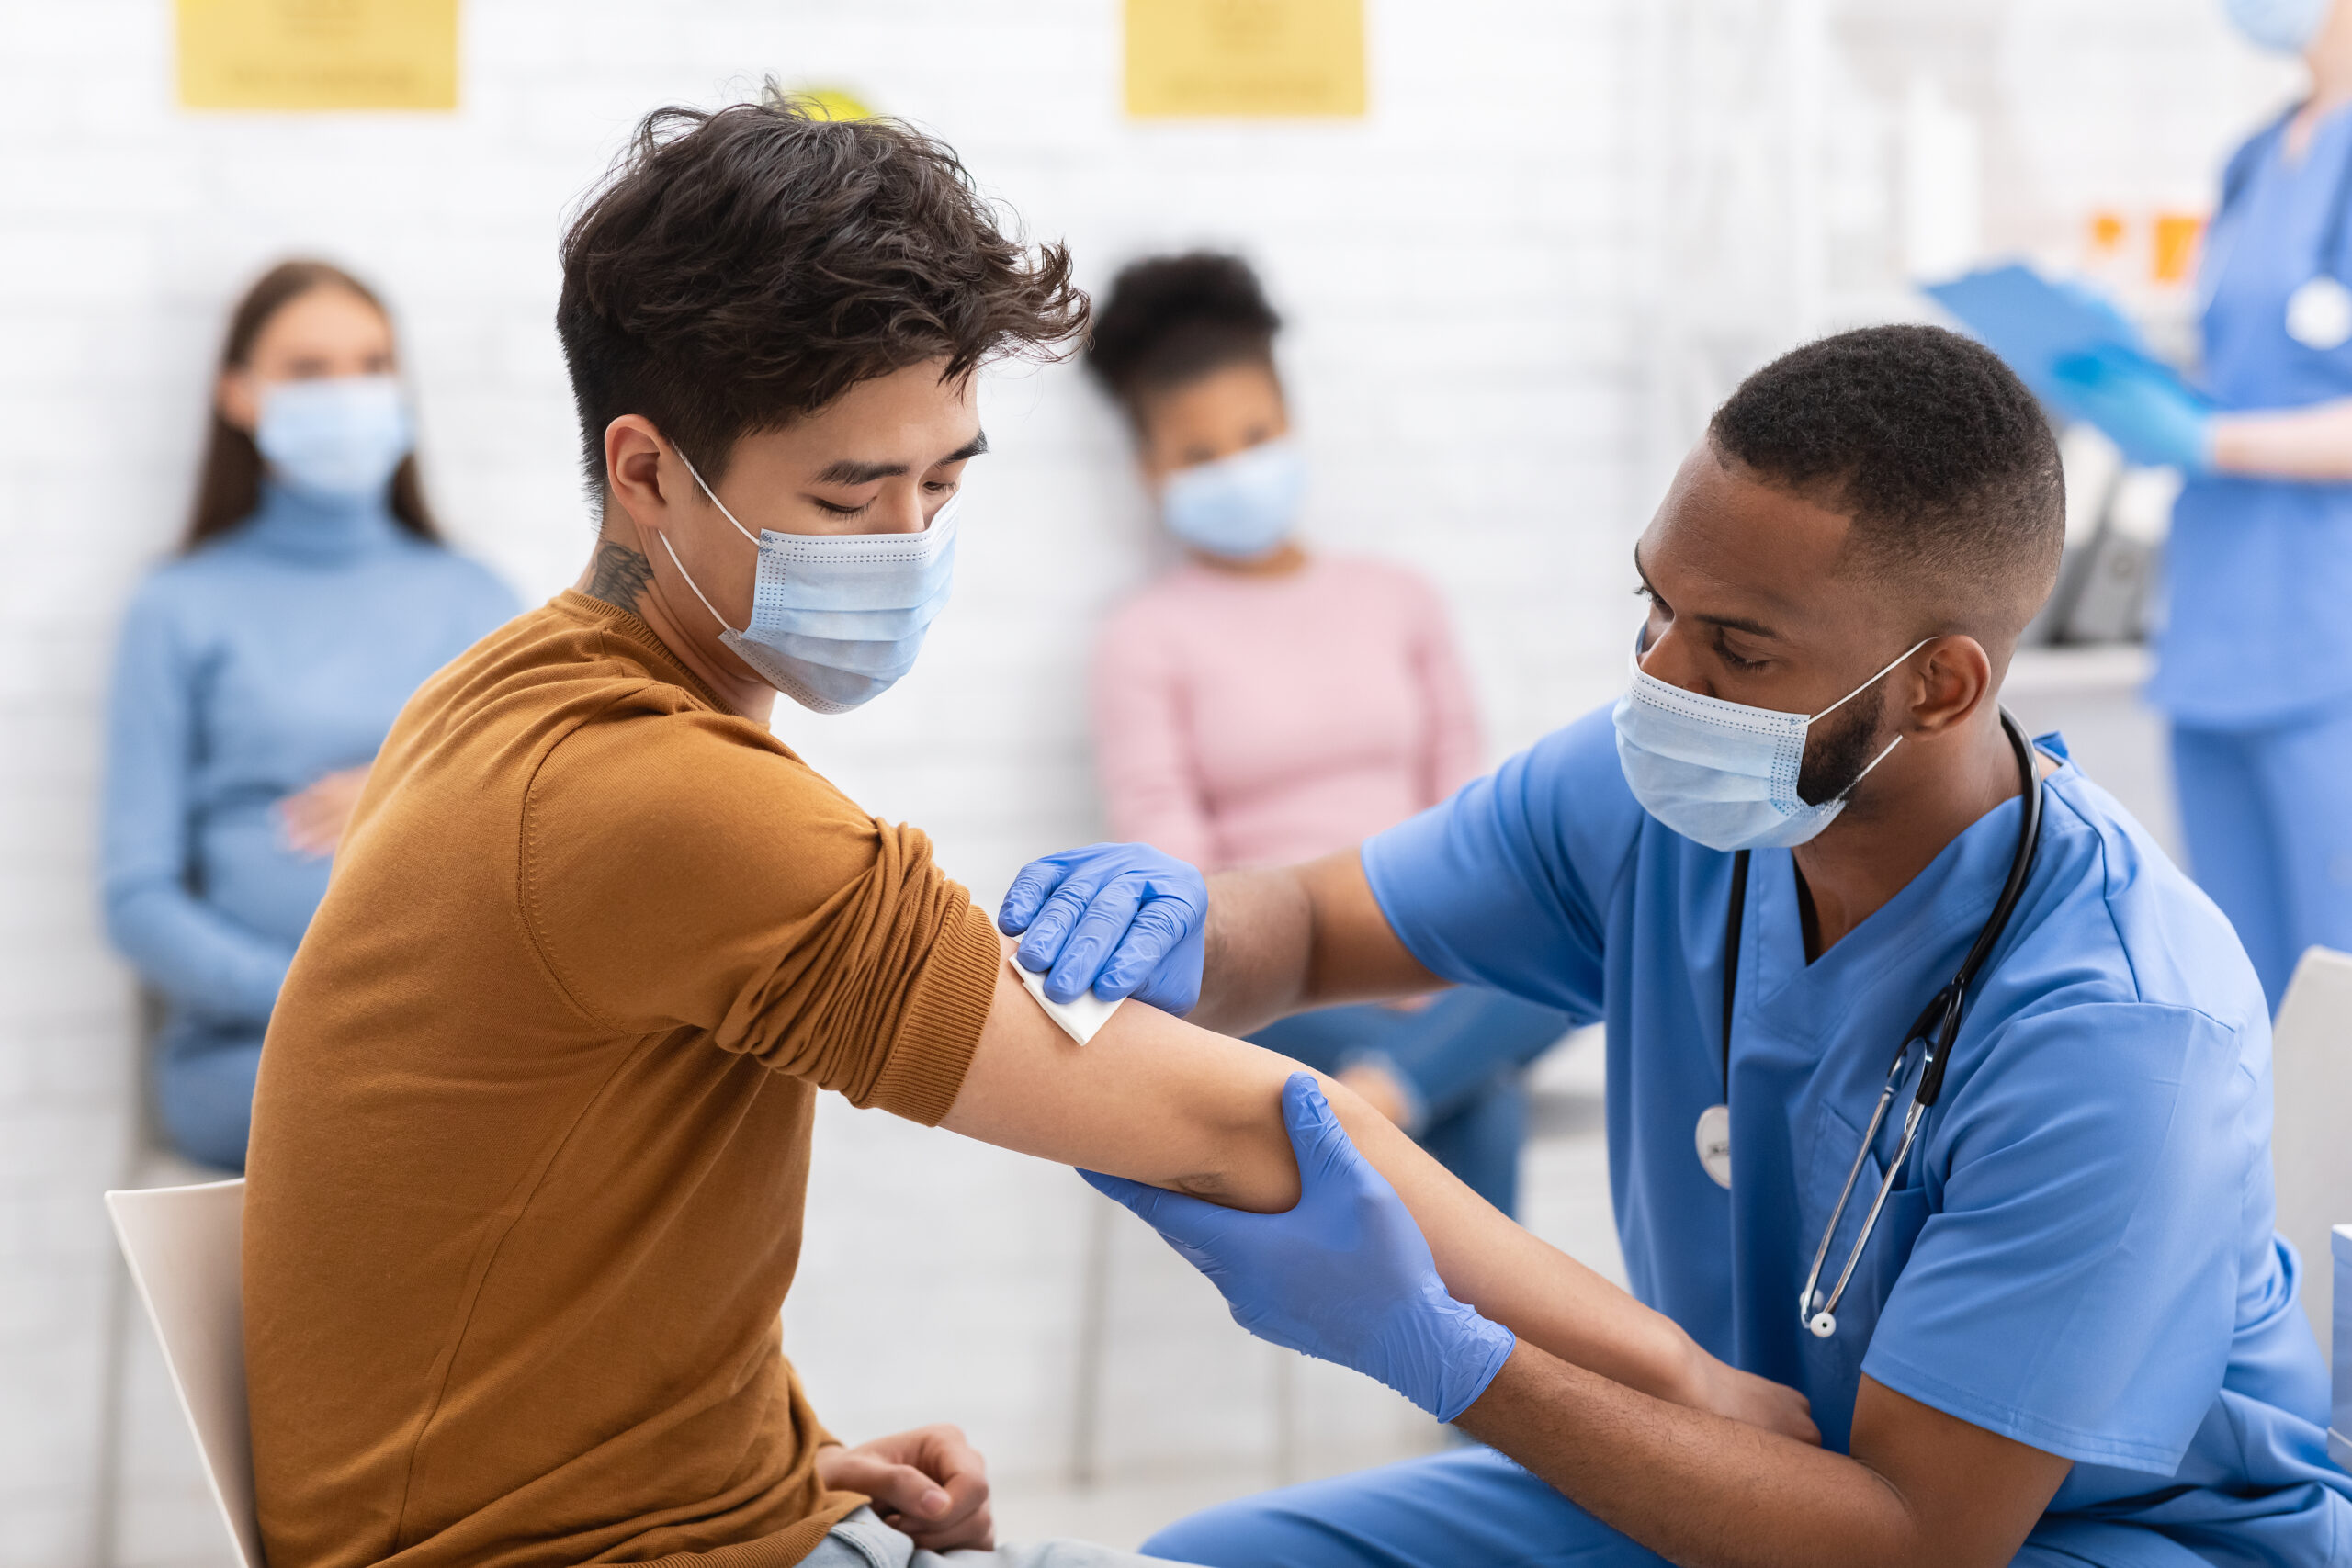 Asian man receives bandage on arm from an African American male nurse in blue scrubs. Both wearing masks